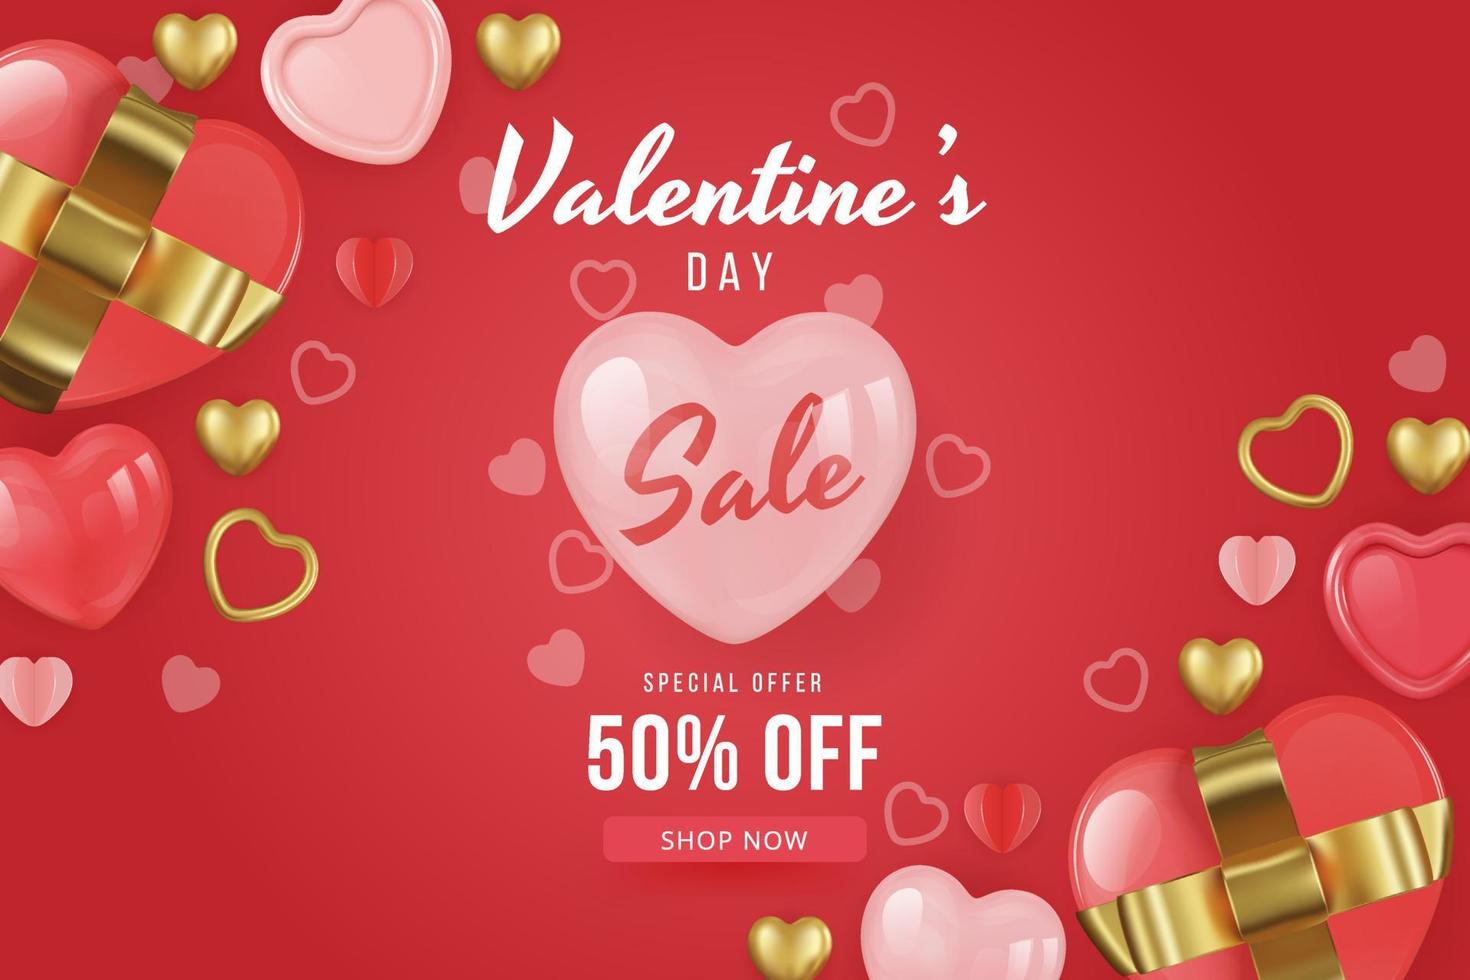 Valentine's day sale background with balloons heart, gift and golden hearts. Vector illustration. Wallpaper, flyers, invitation, posters, brochure, banners.